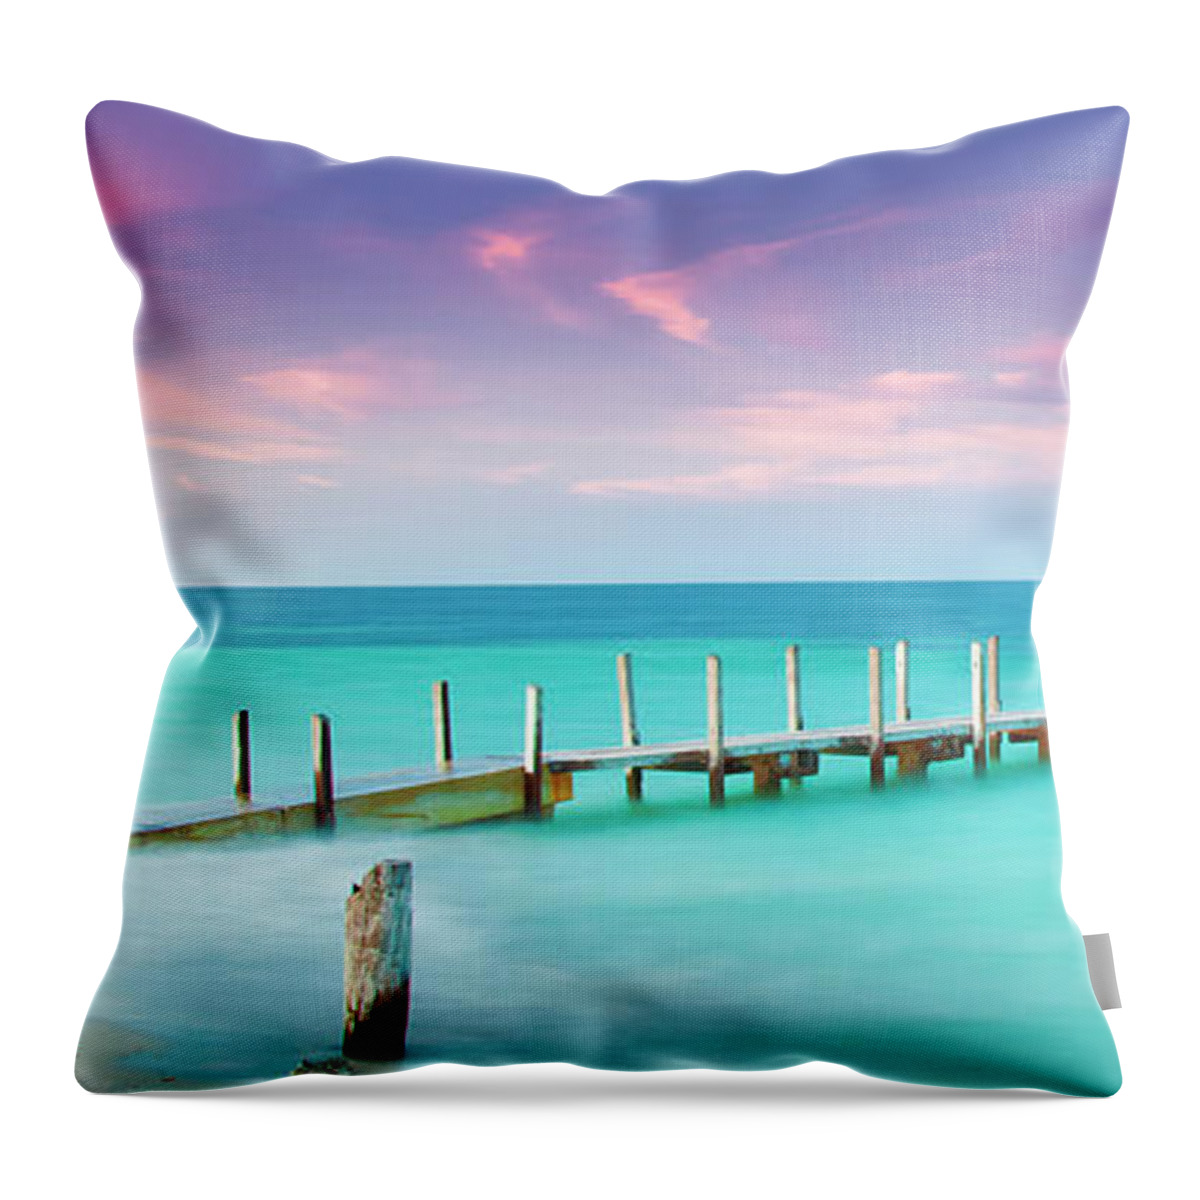 Quindalup Boat Ramp Throw Pillow featuring the photograph Aqua Waters by Az Jackson